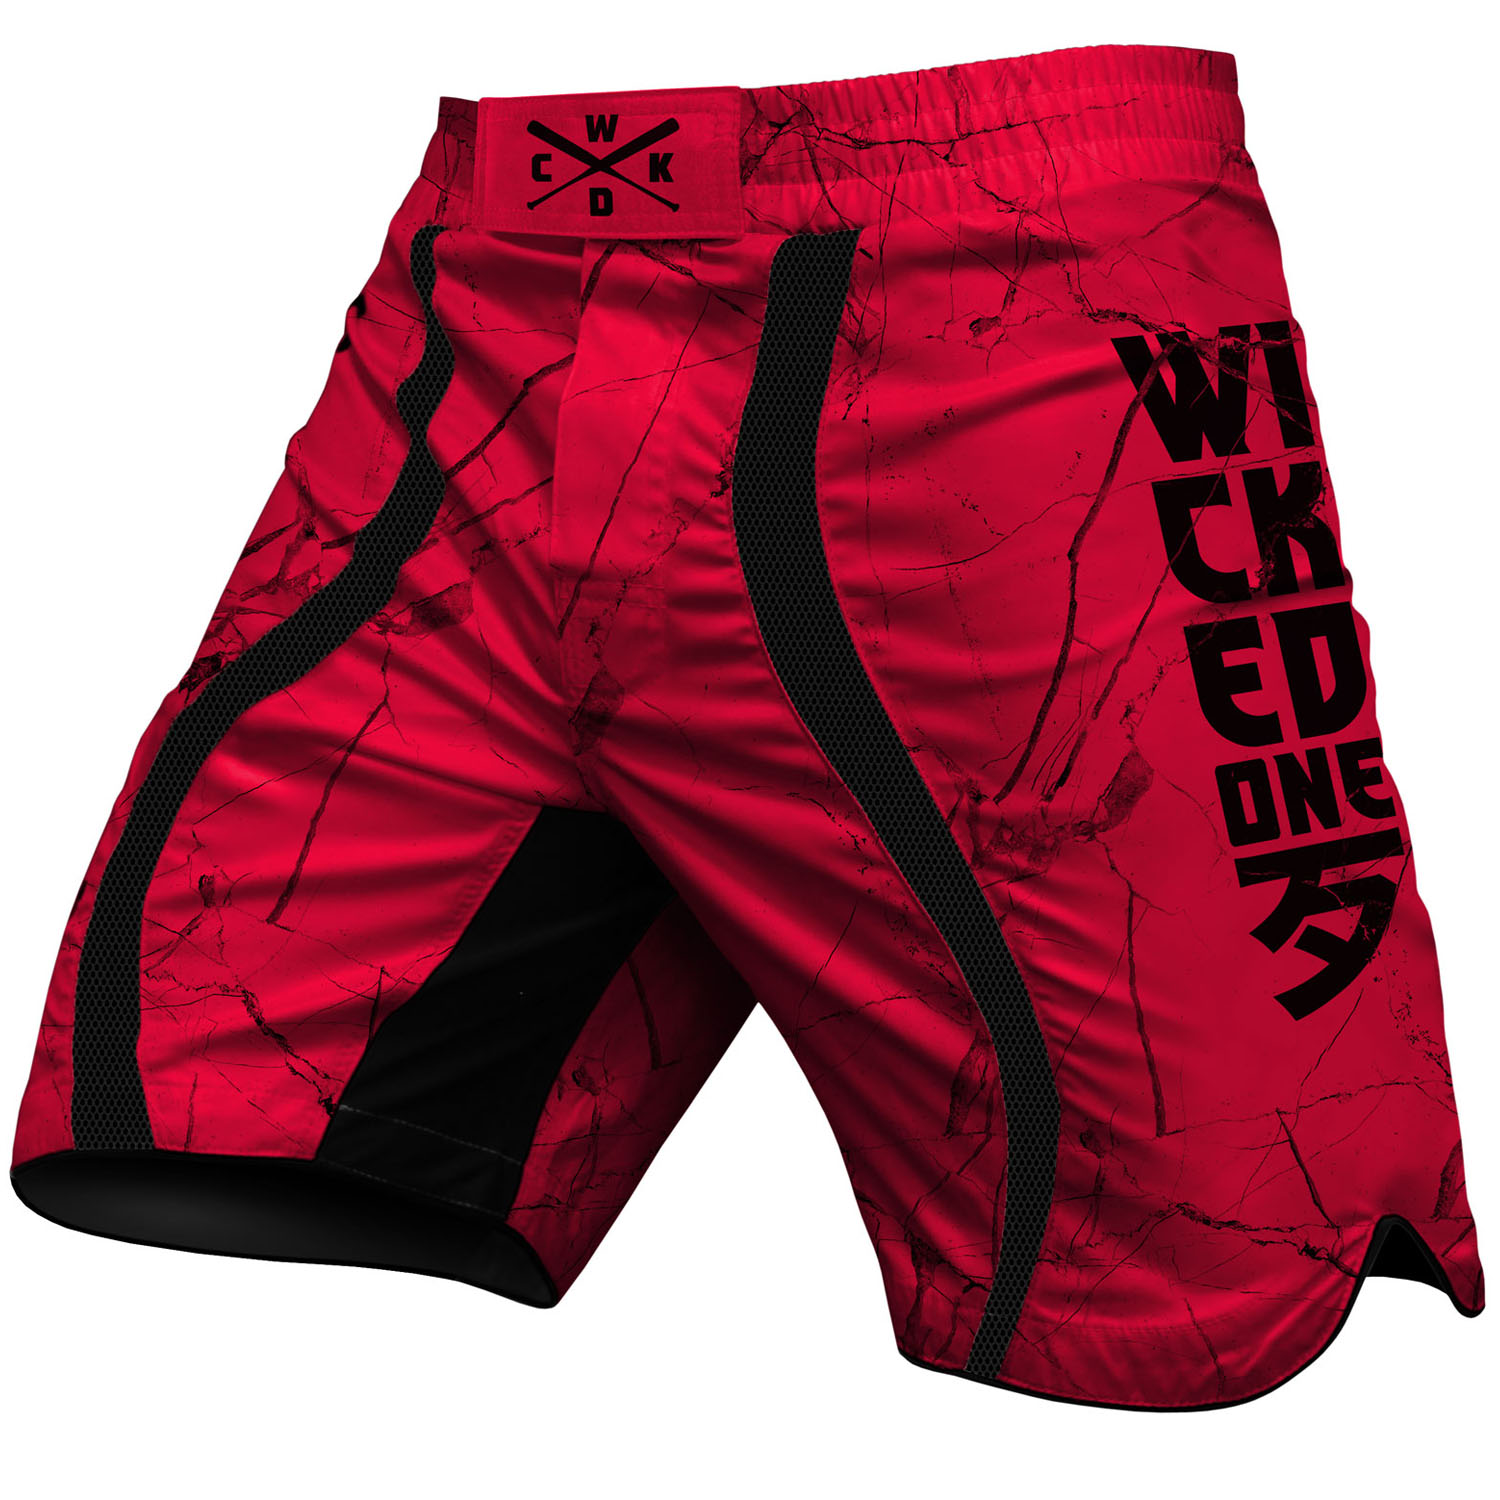 Wicked One MMA Fight Shorts, Broken, red